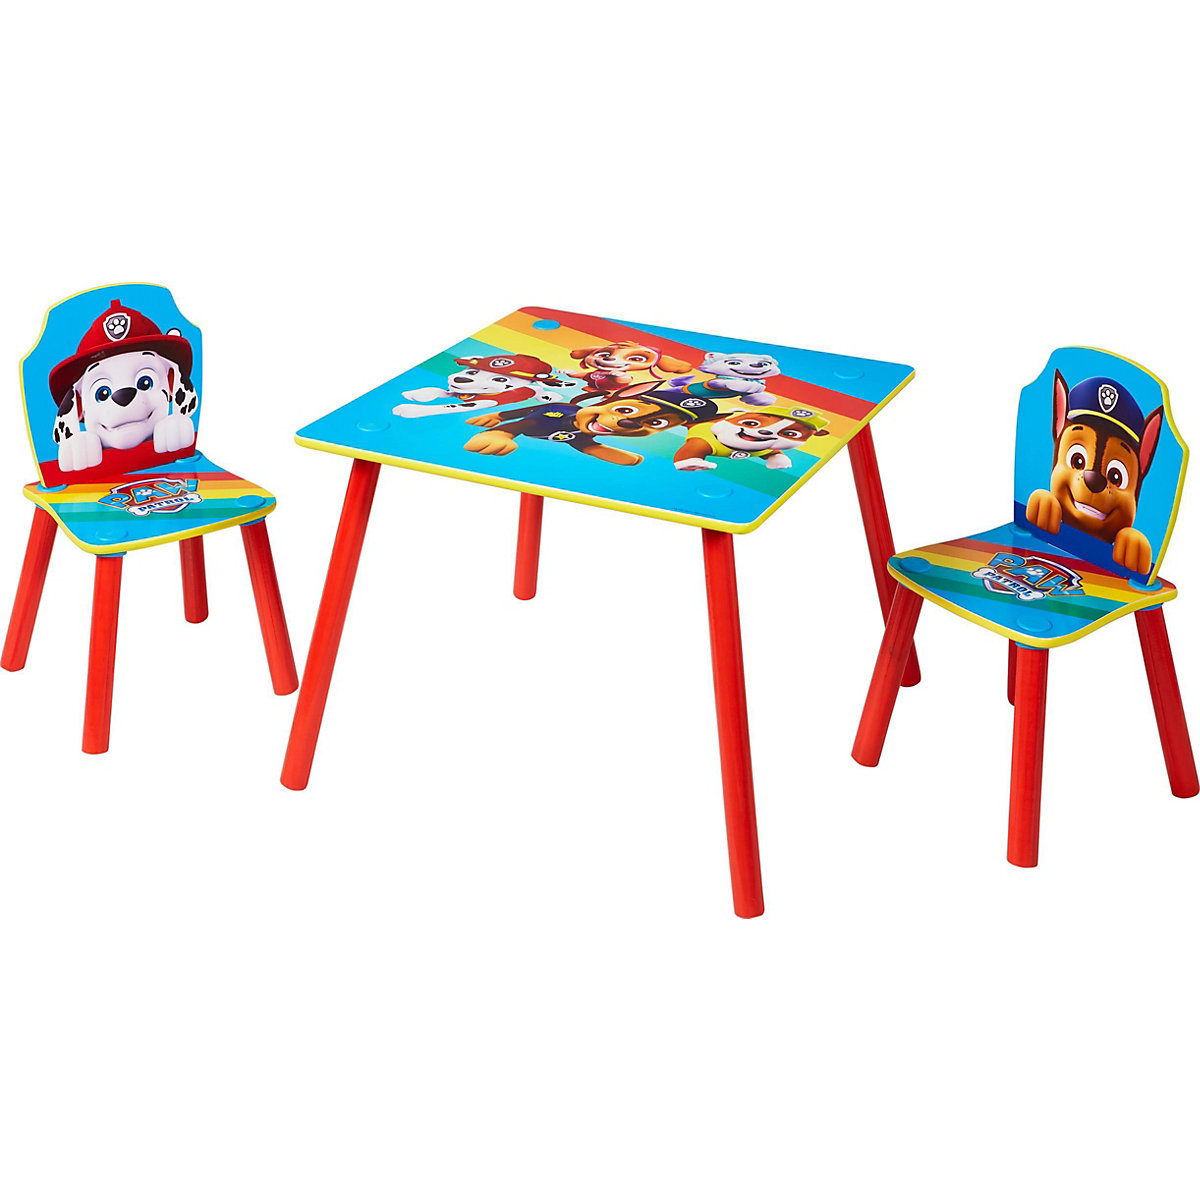 Paw Patrol Kids Table and 2 Chairs Set